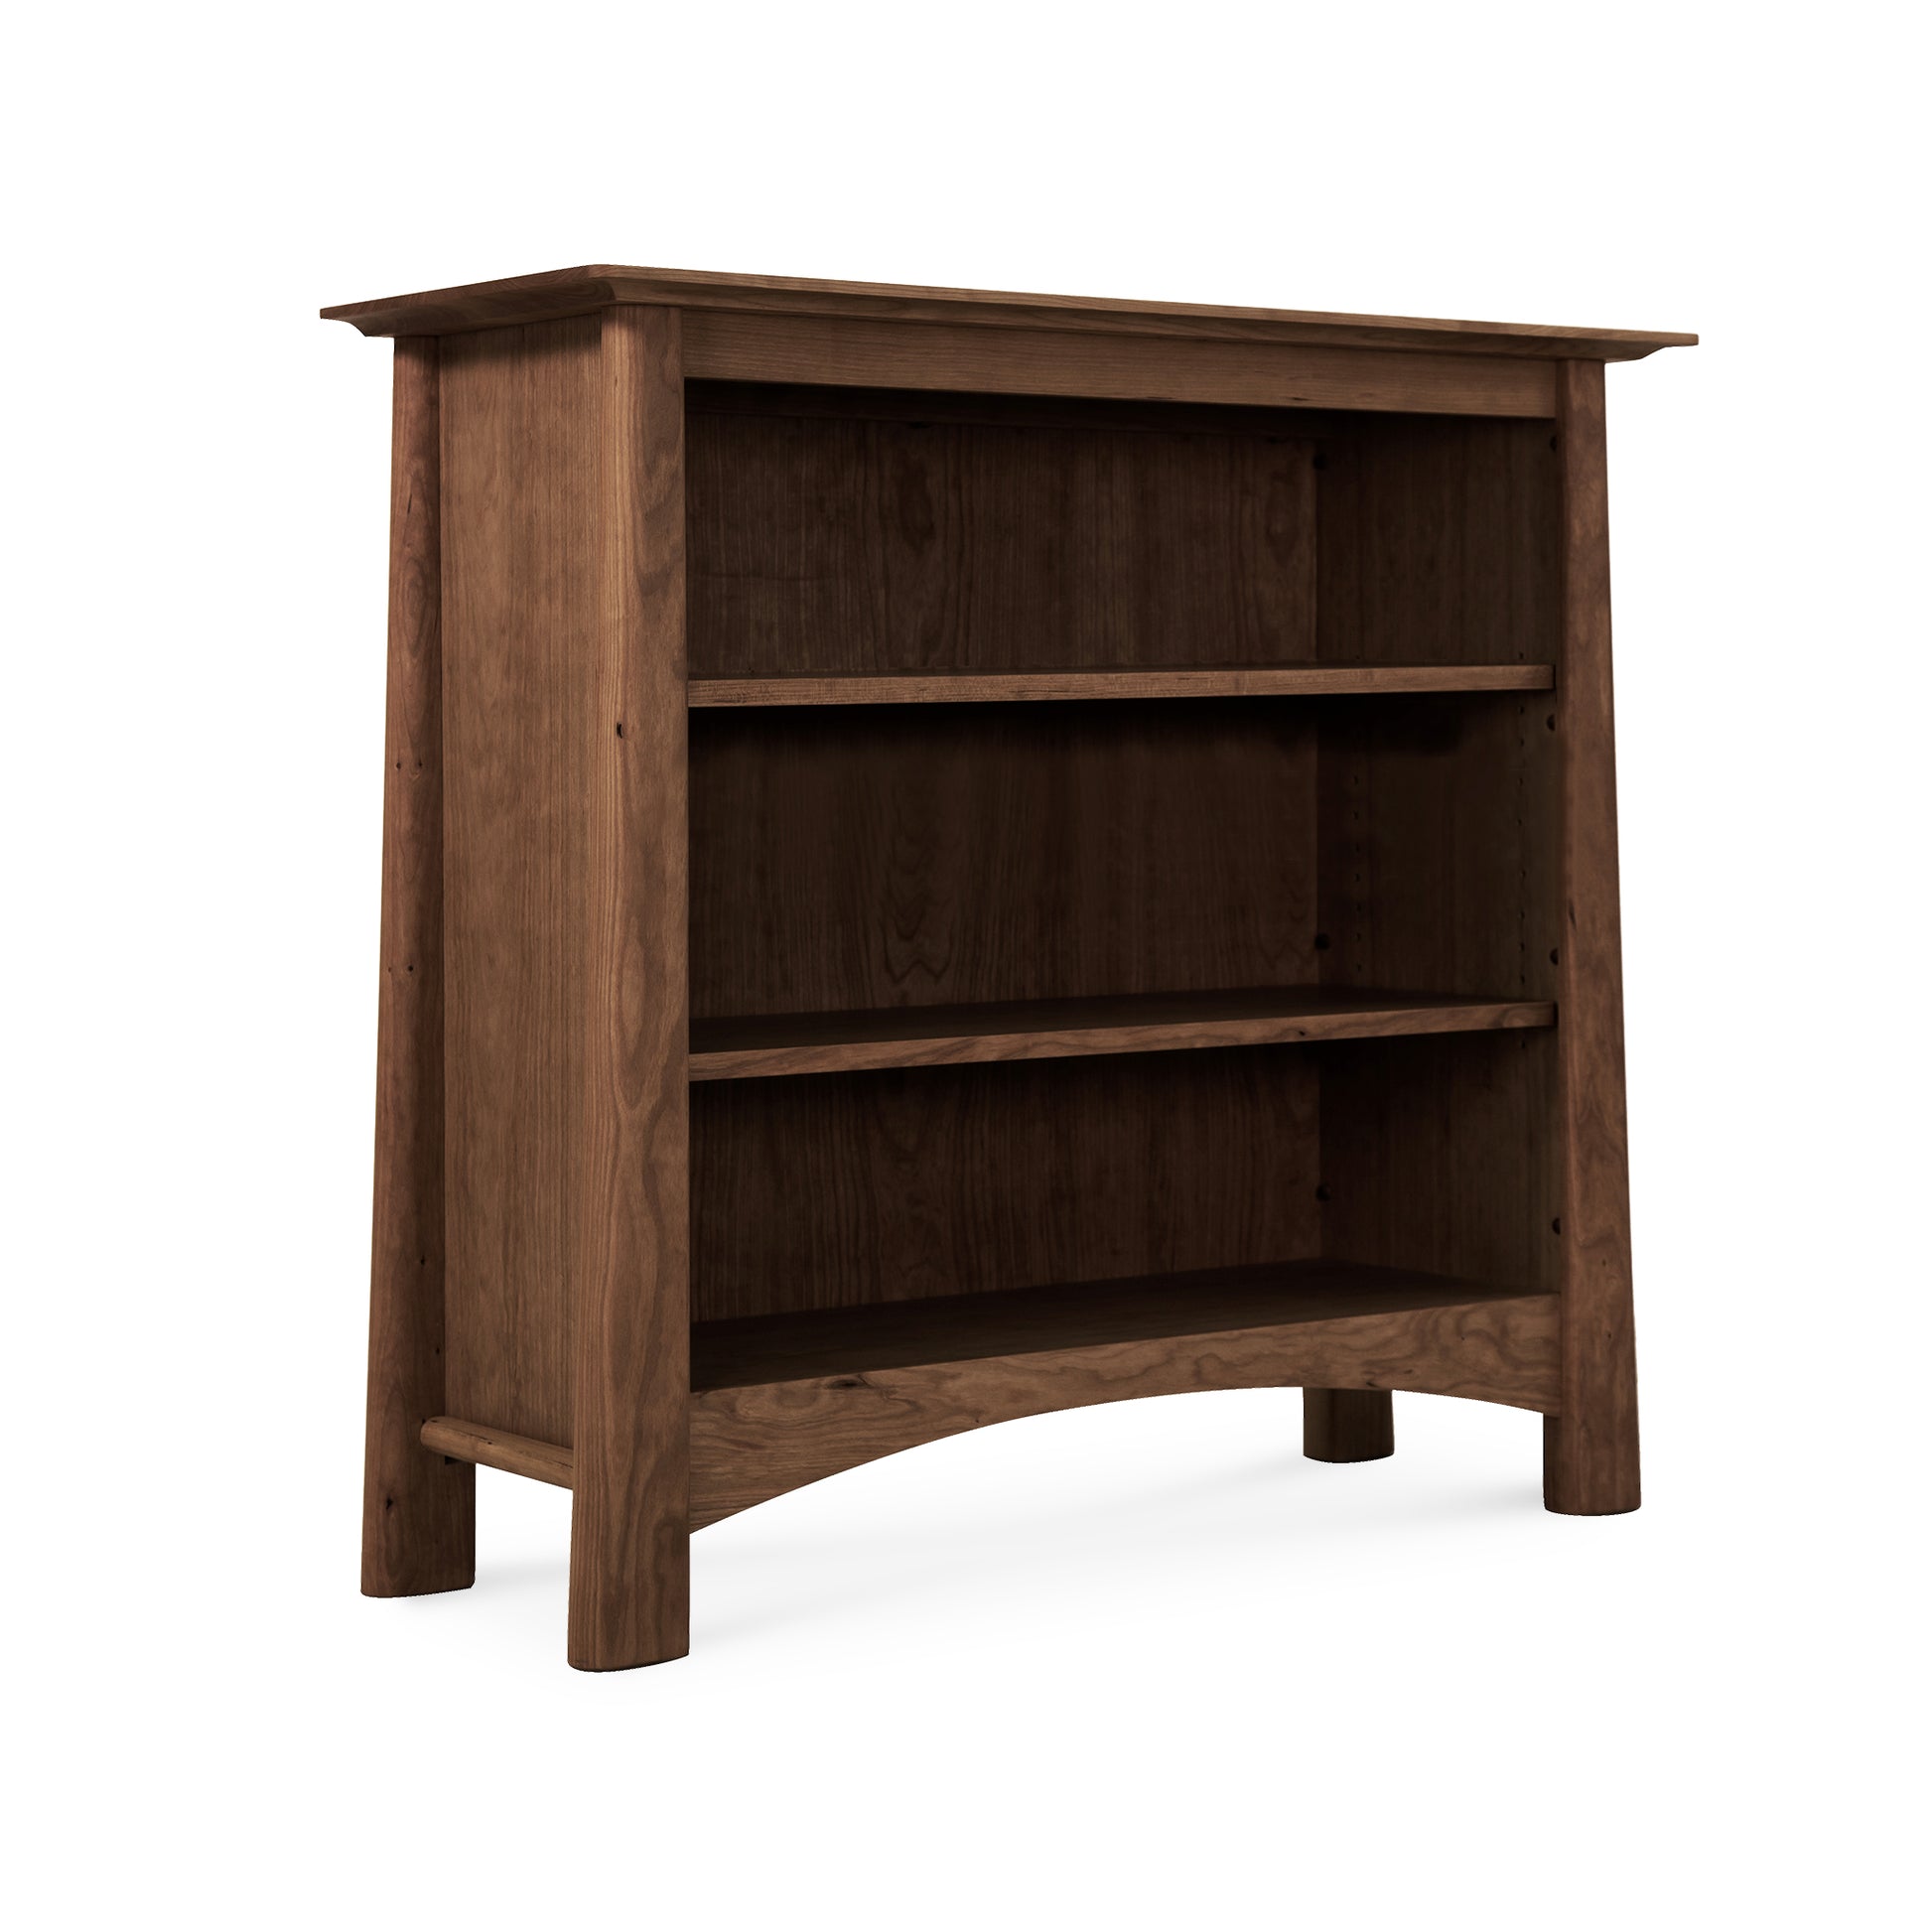 A Maple Corner Woodworks Cherry Moon bookcase with three shelves, isolated on a white background.